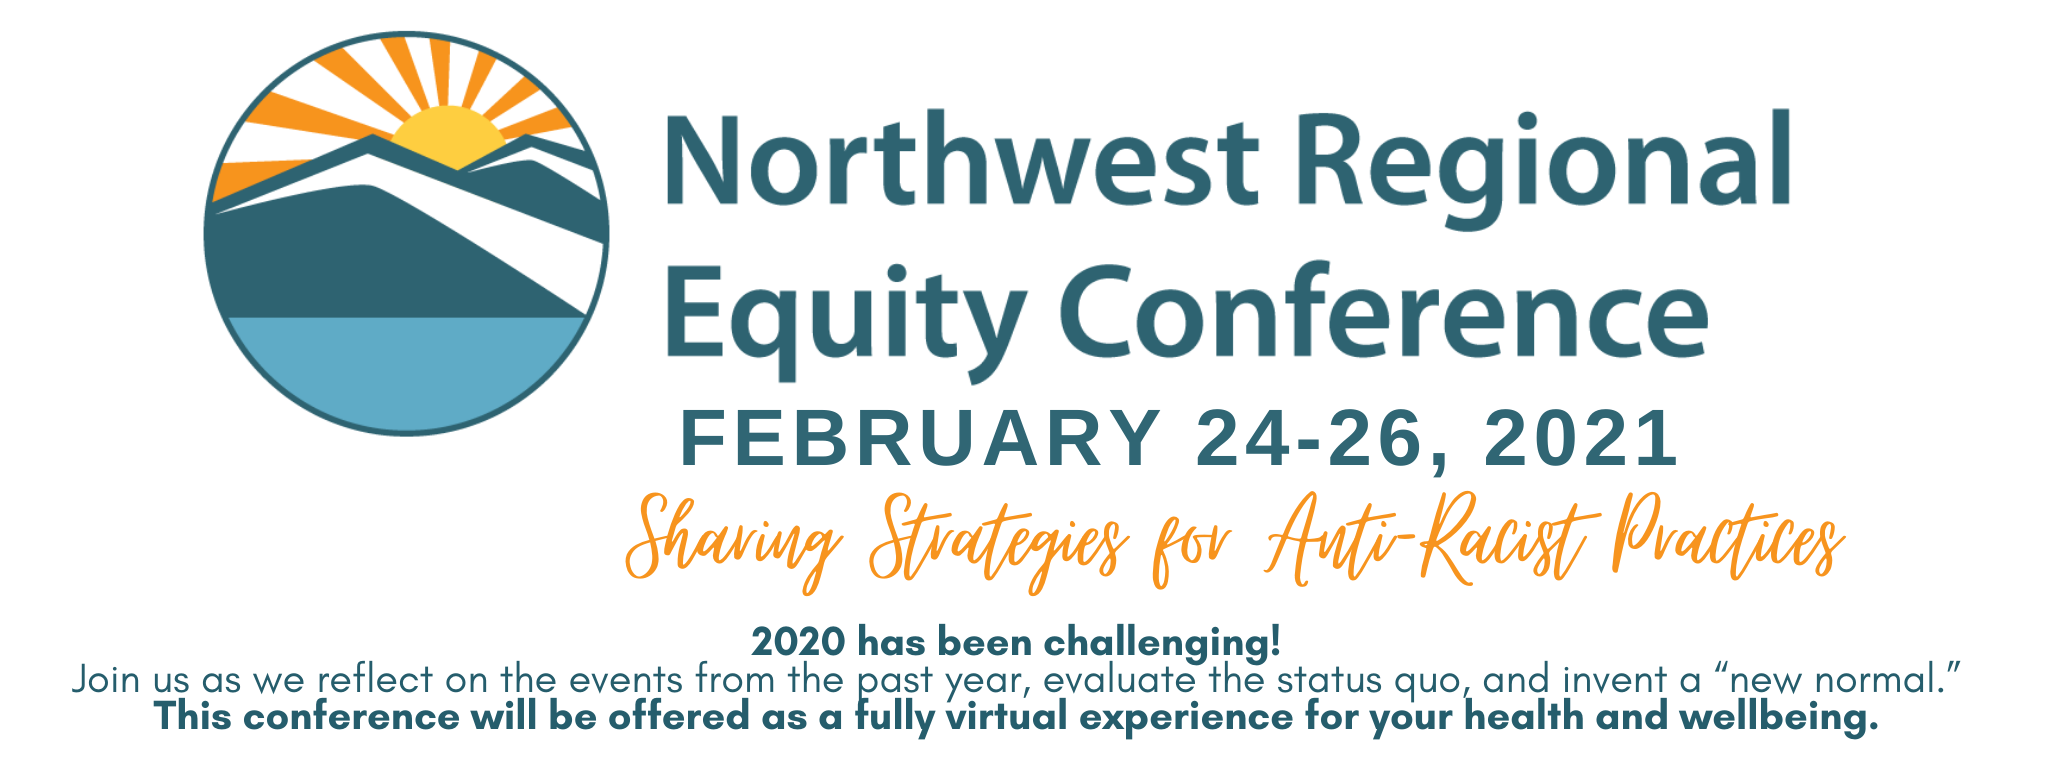 Nw Regional Equity Conference For Higher Education